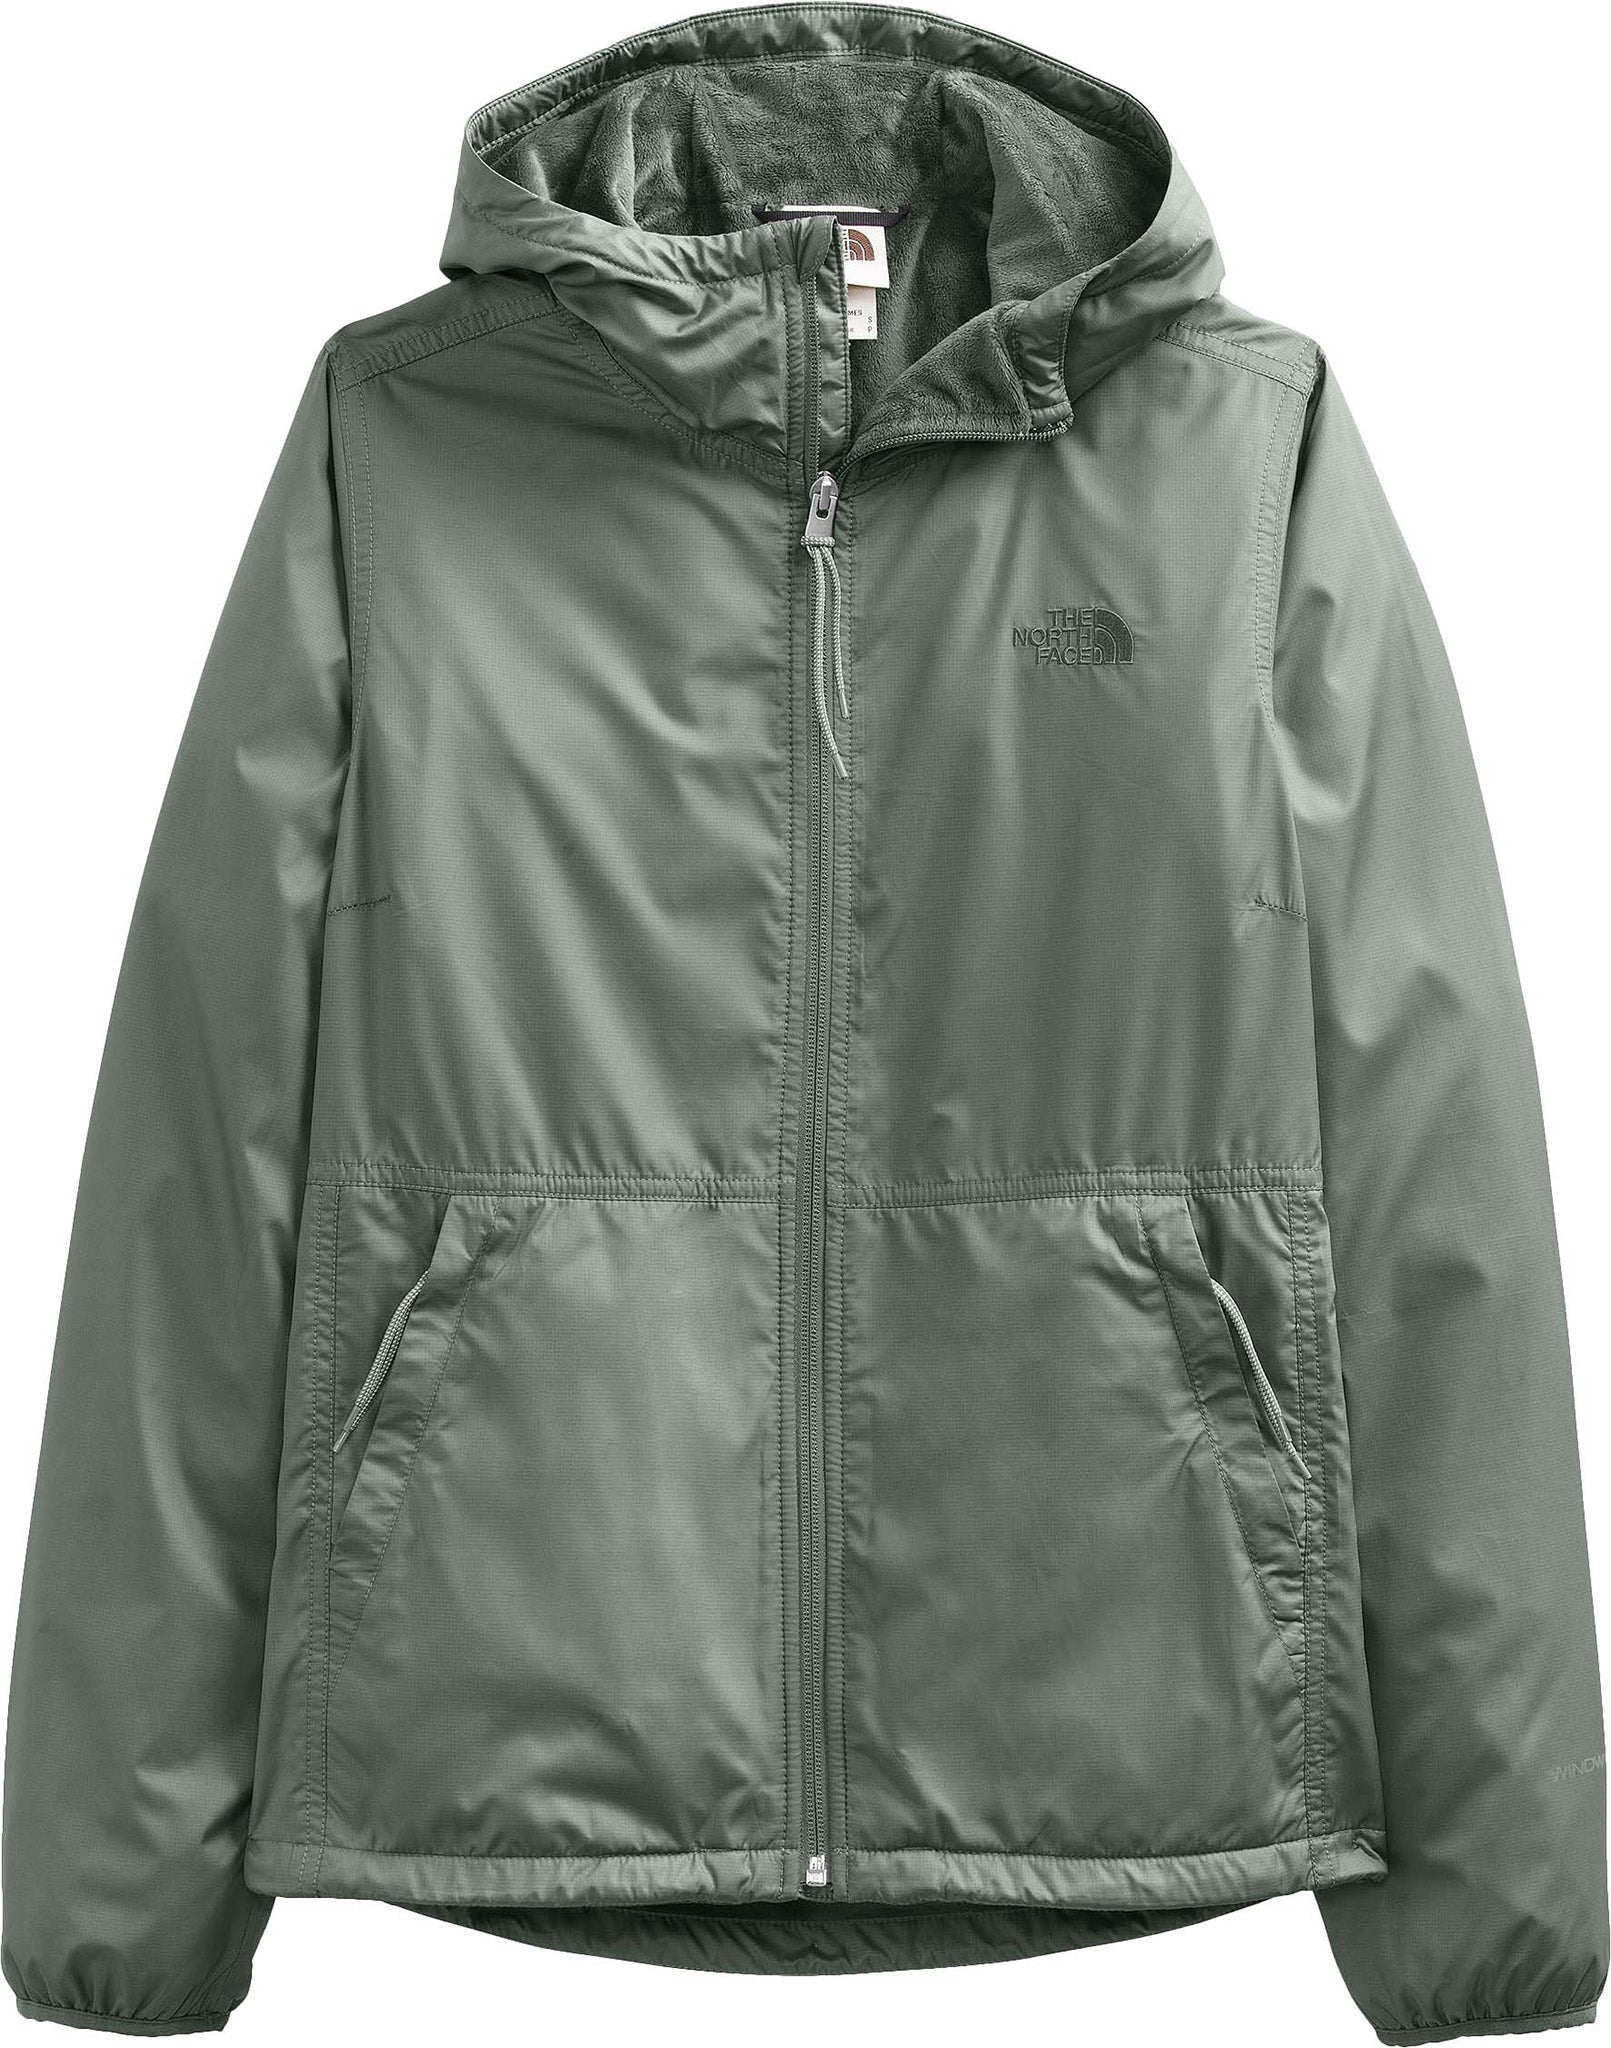 The North Face Women's Pitaya Hooded